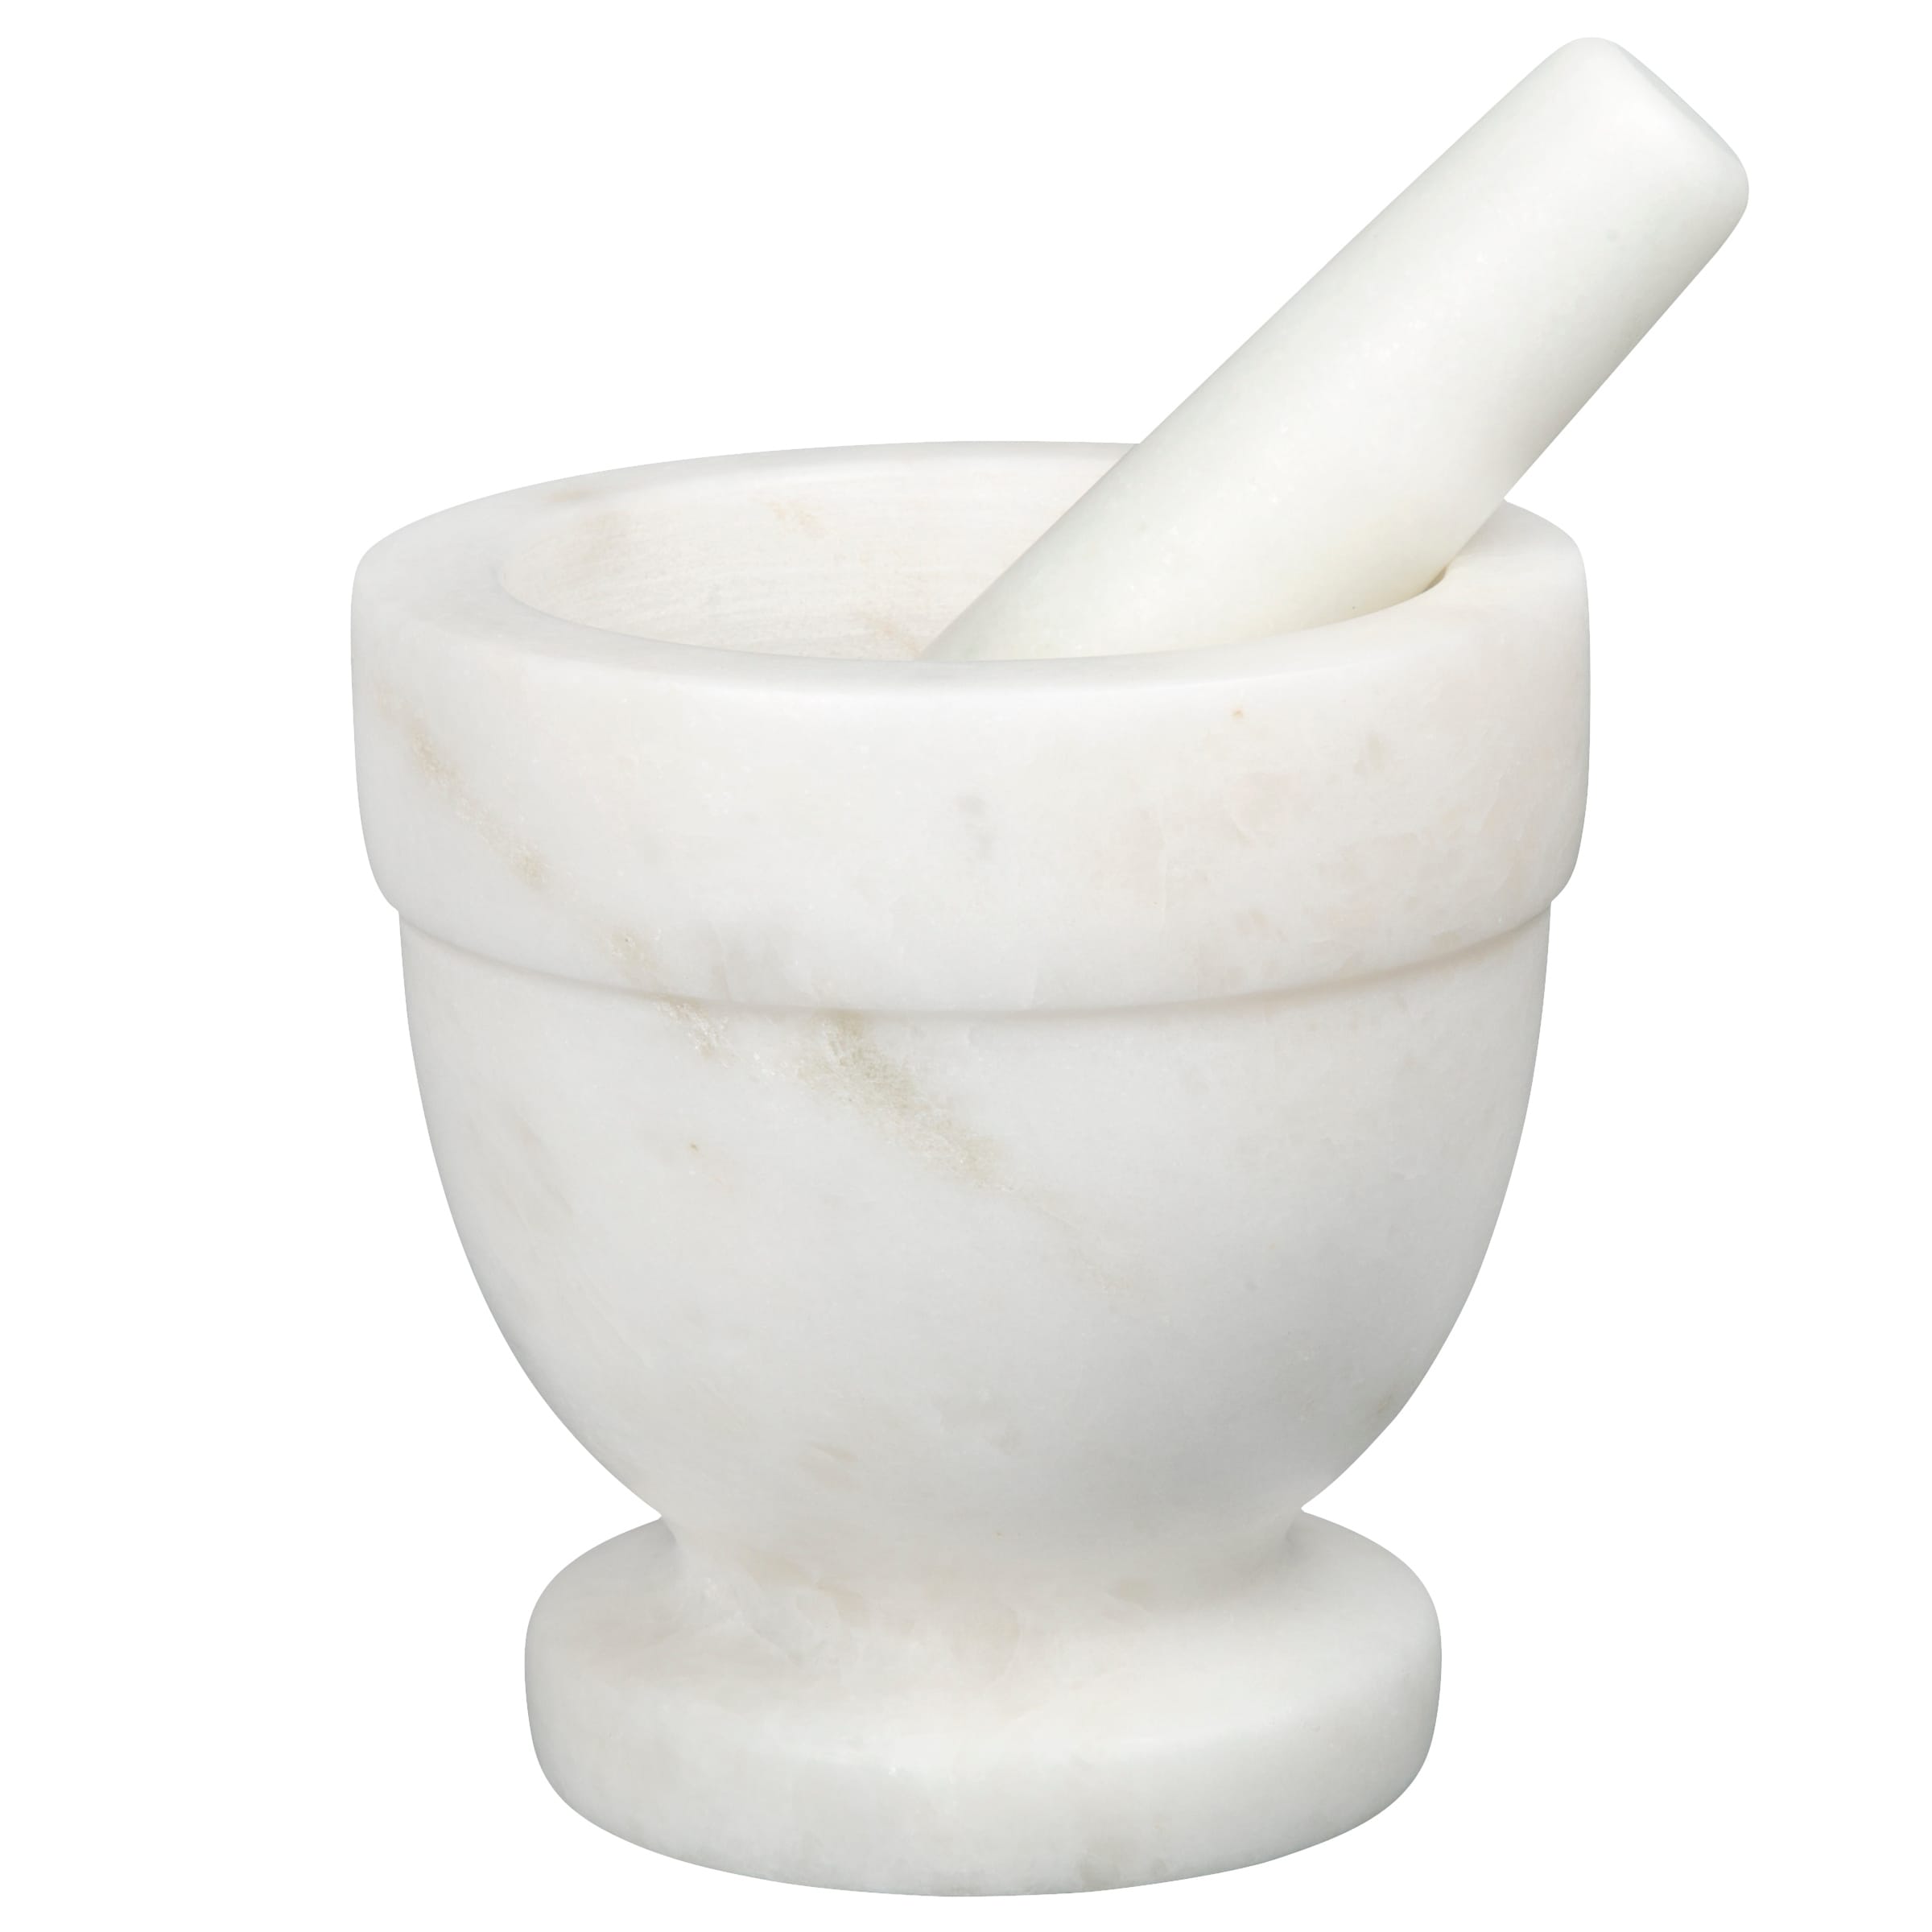 https://ak1.ostkcdn.com/images/products/is/images/direct/05c3a05118751b8f4f0946778d301880b8fe353a/Creative-Home-White-Marble-Mortar-Pestle%2C-4%22.jpg